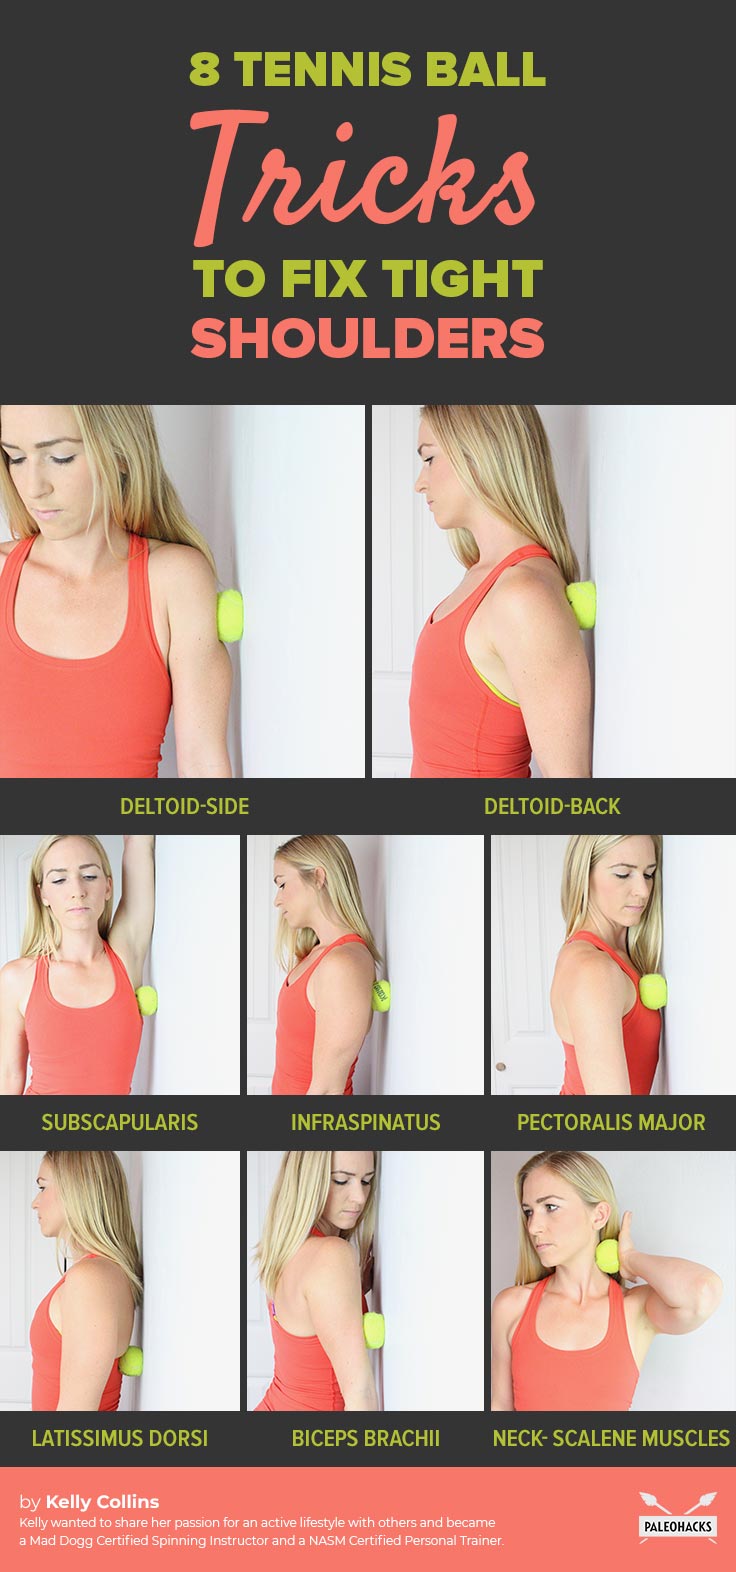 Unlock tight shoulders with these easy exercises using tennis balls to release tension and increase mobility.